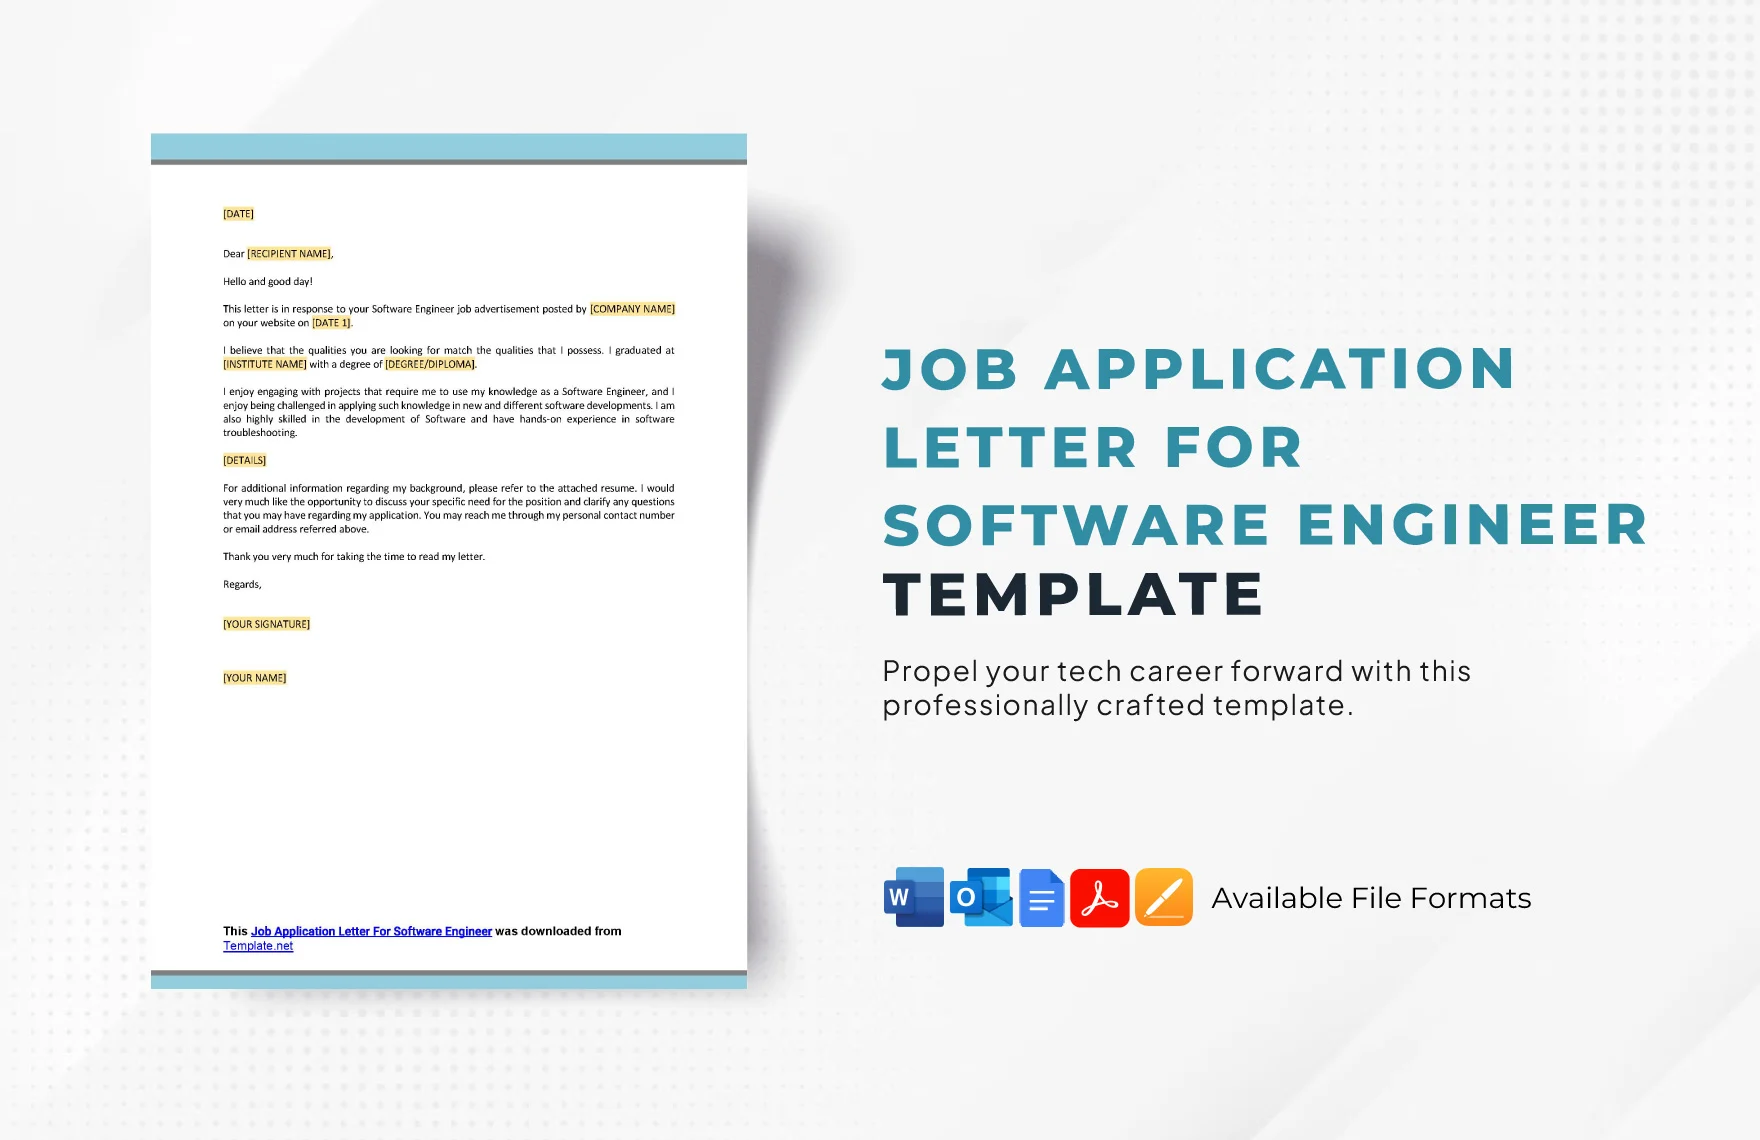 Free Job Application Letter For Software Engineer in Word, Google Docs, PDF, Apple Pages, Outlook